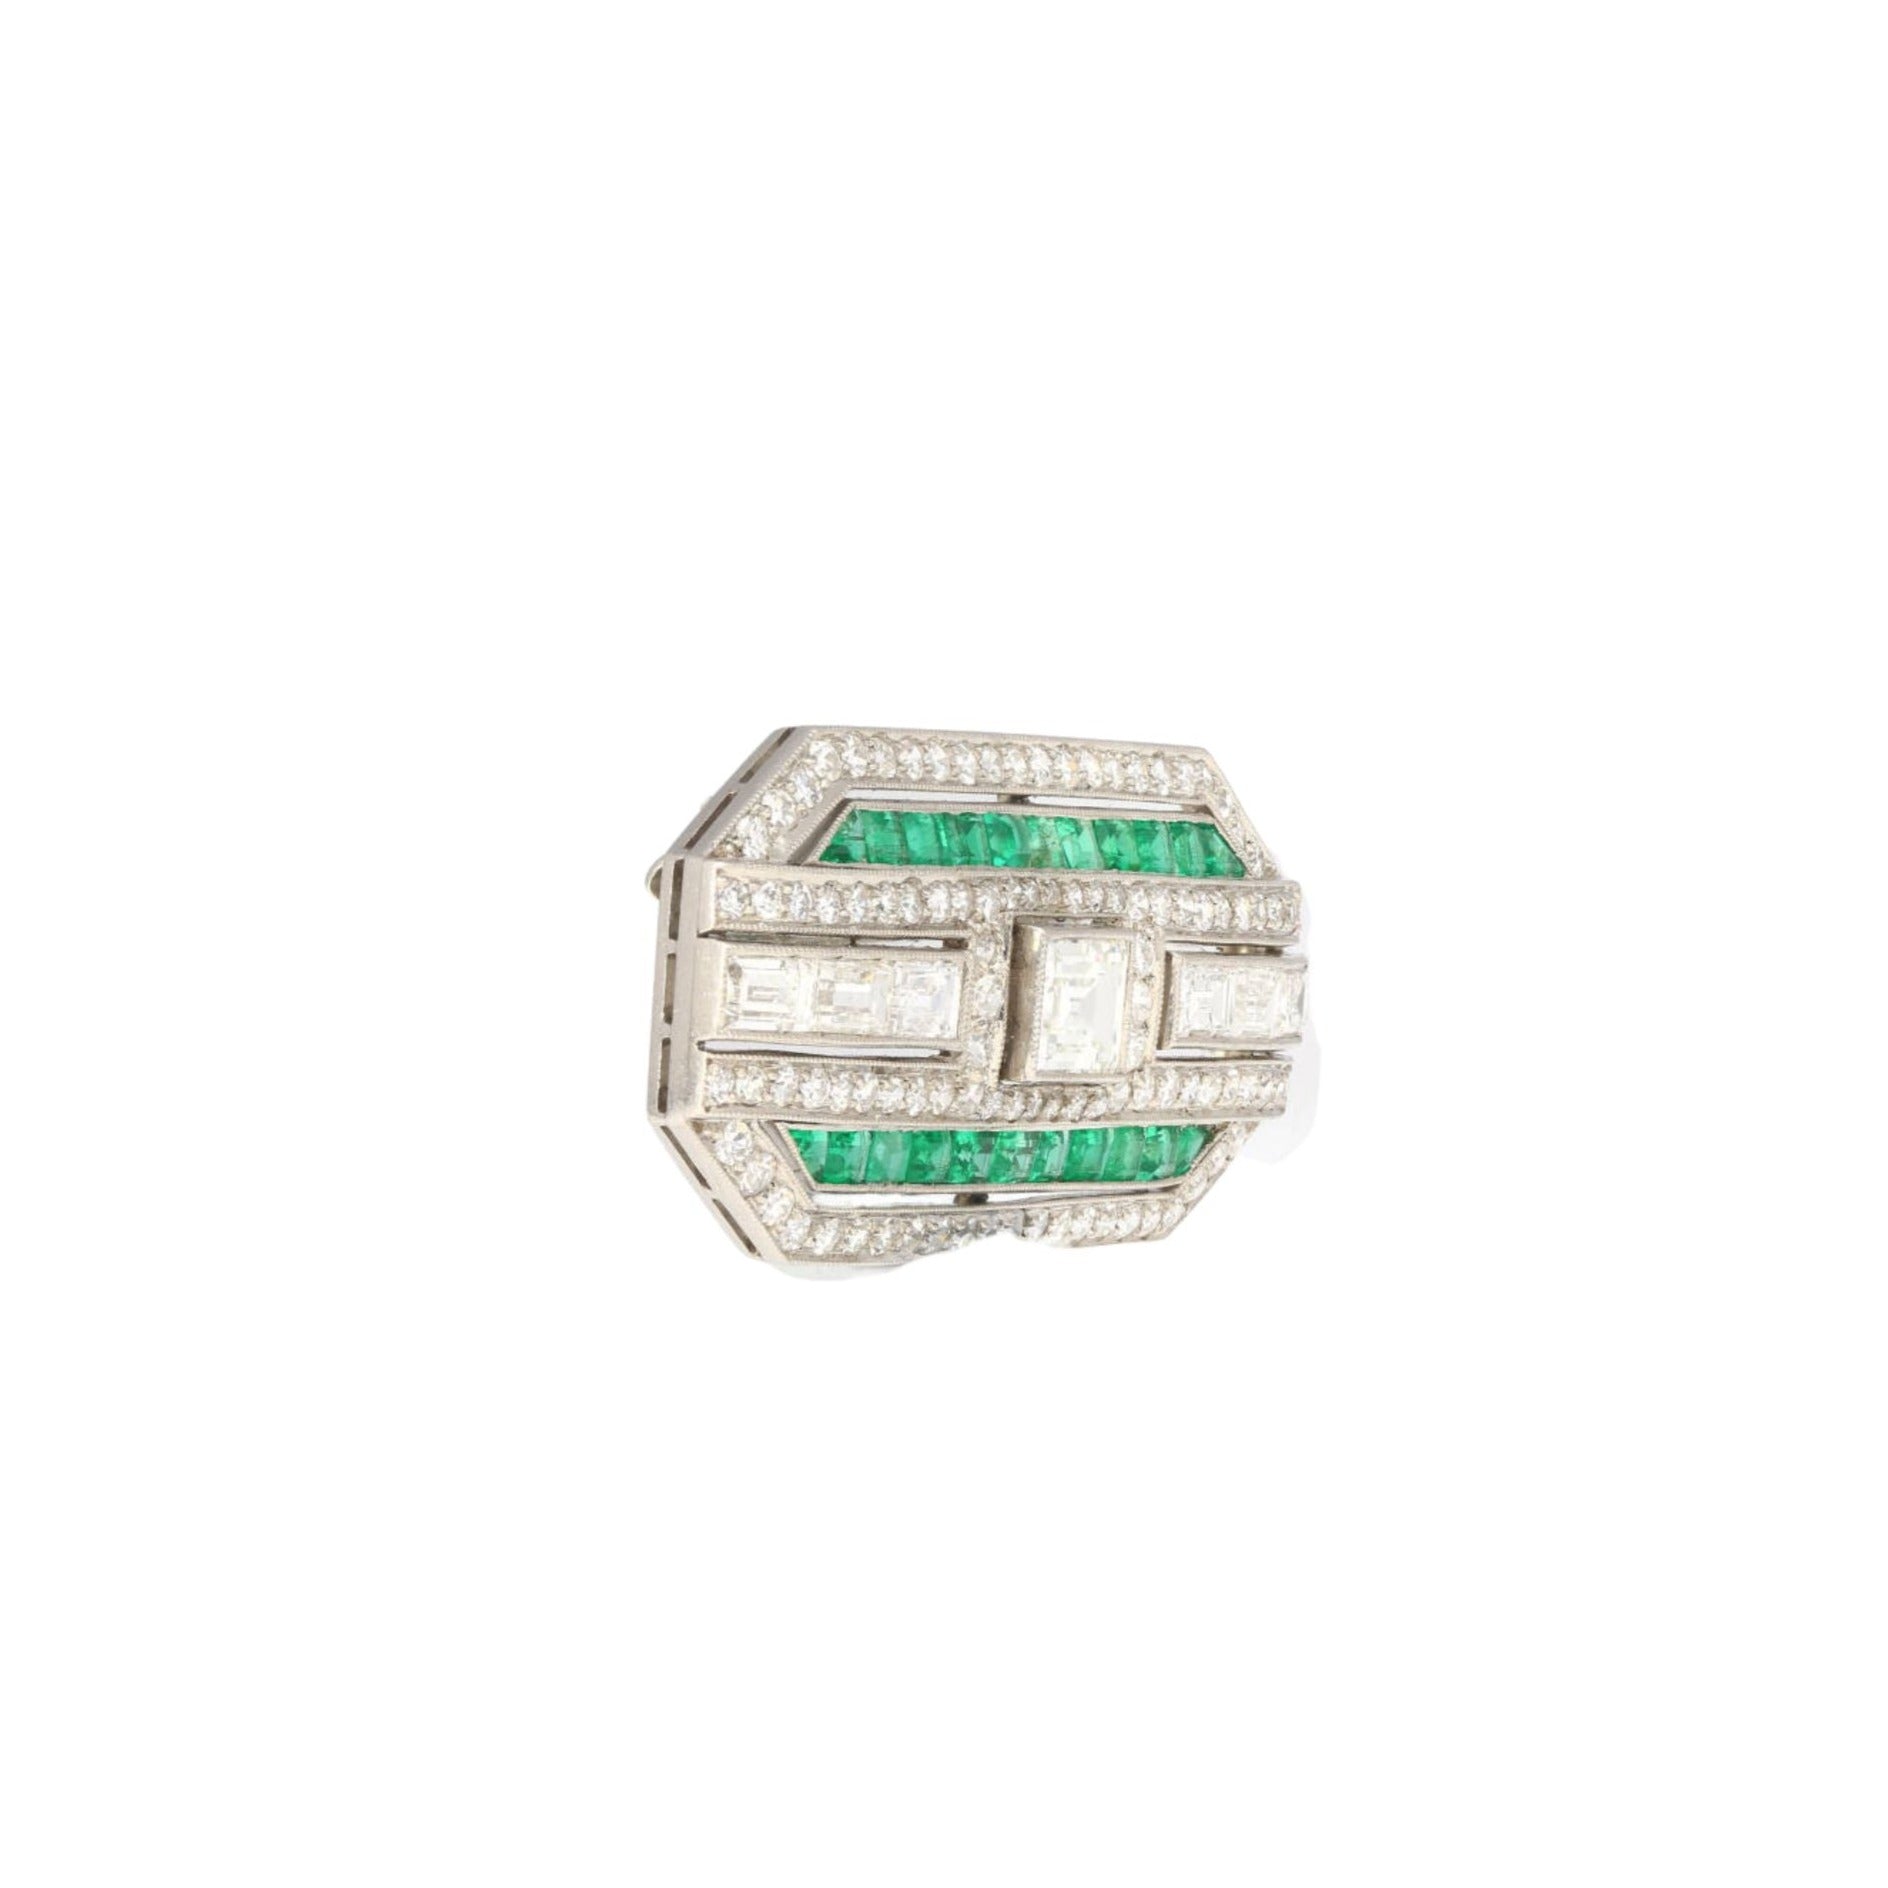 Platinum-and-18K-White-Gold-Brooch-with-Diamonds-and-Emerald-Brooches-Lapel-Pins-2.jpg